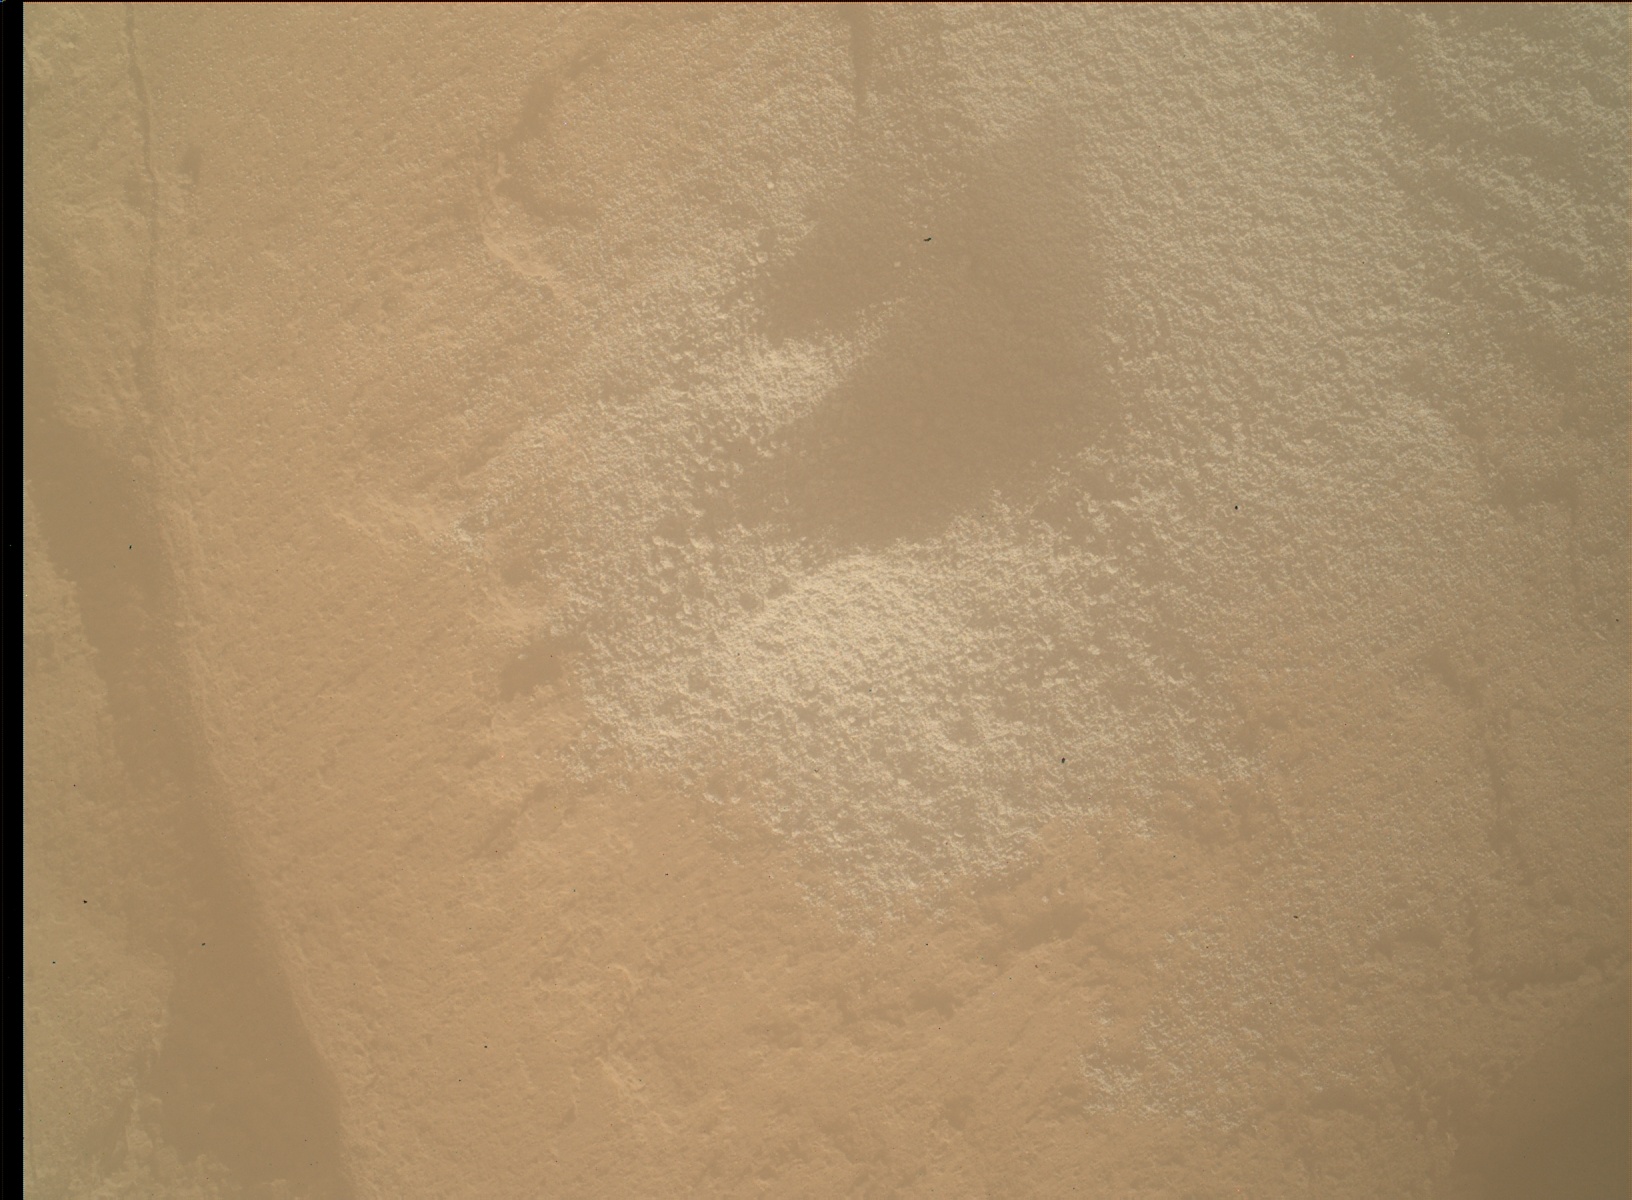 Nasa's Mars rover Curiosity acquired this image using its Mars Hand Lens Imager (MAHLI) on Sol 1202